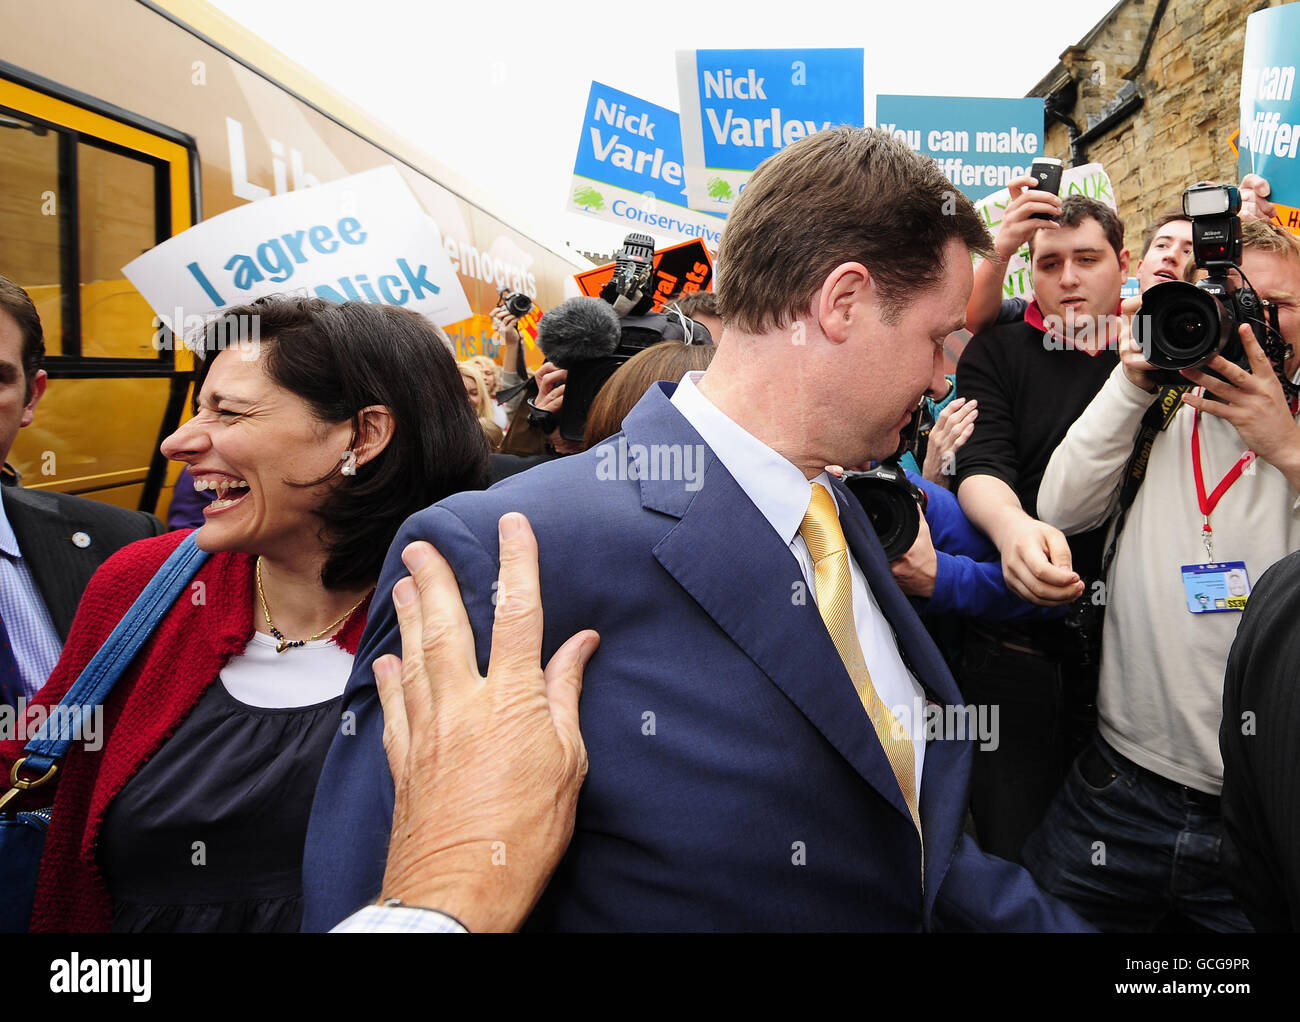 The Liberal Democrat Party leader Nick Clegg greets people as he arrives for a meeting with University students in Durham this afternoon. Stock Photo